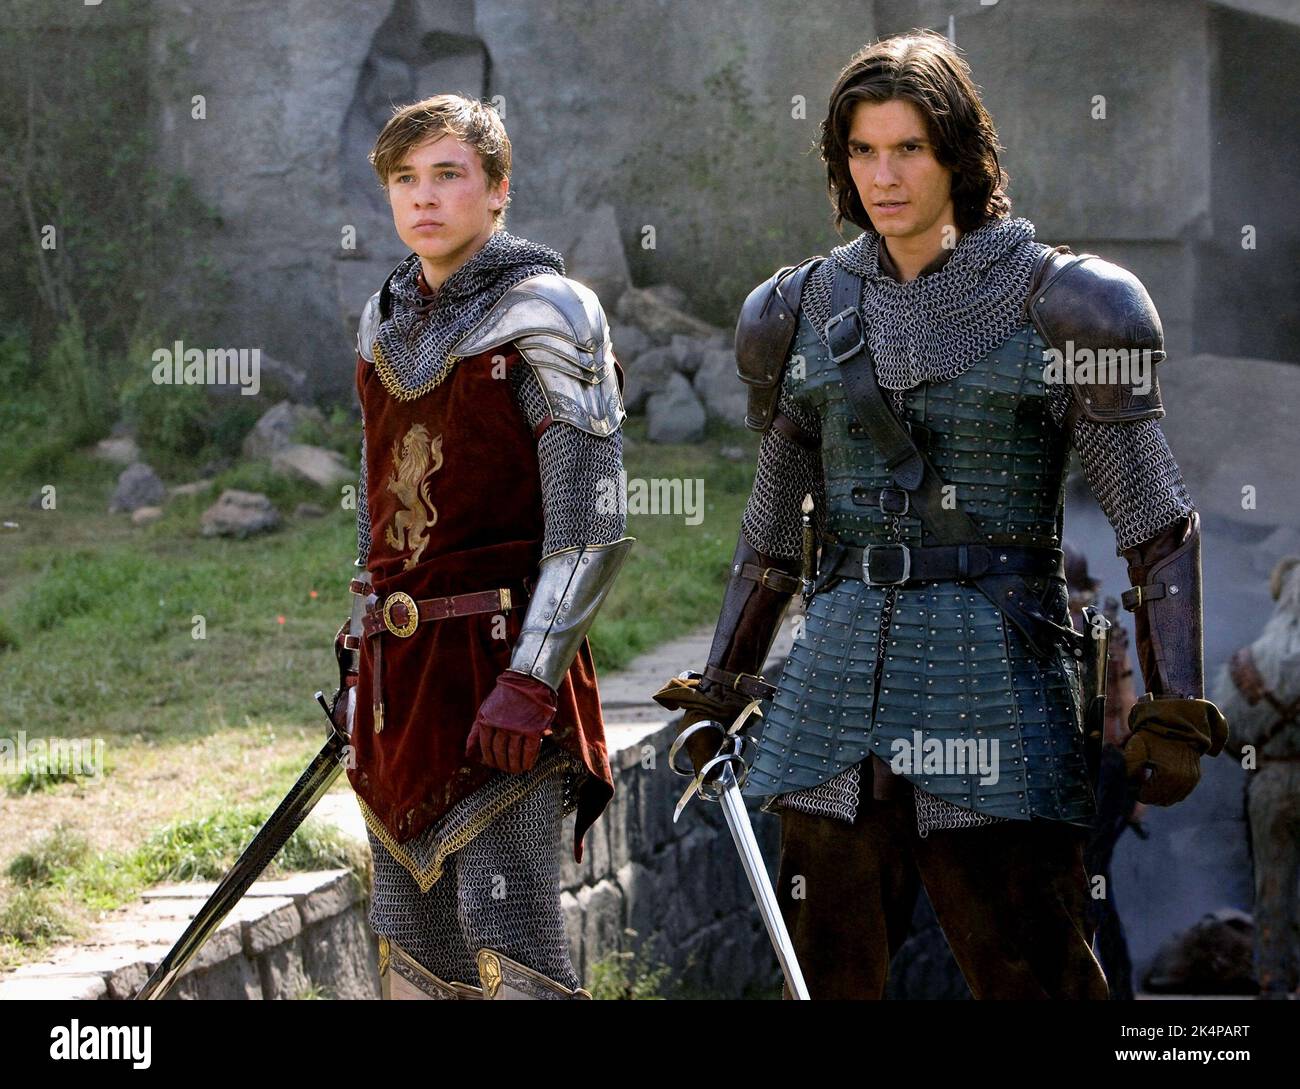 WILLIAM MOSELEY, BEN BARNES, THE CHRONICLES OF NARNIA: PRINCE CASPIAN, 2008 Stock Photo